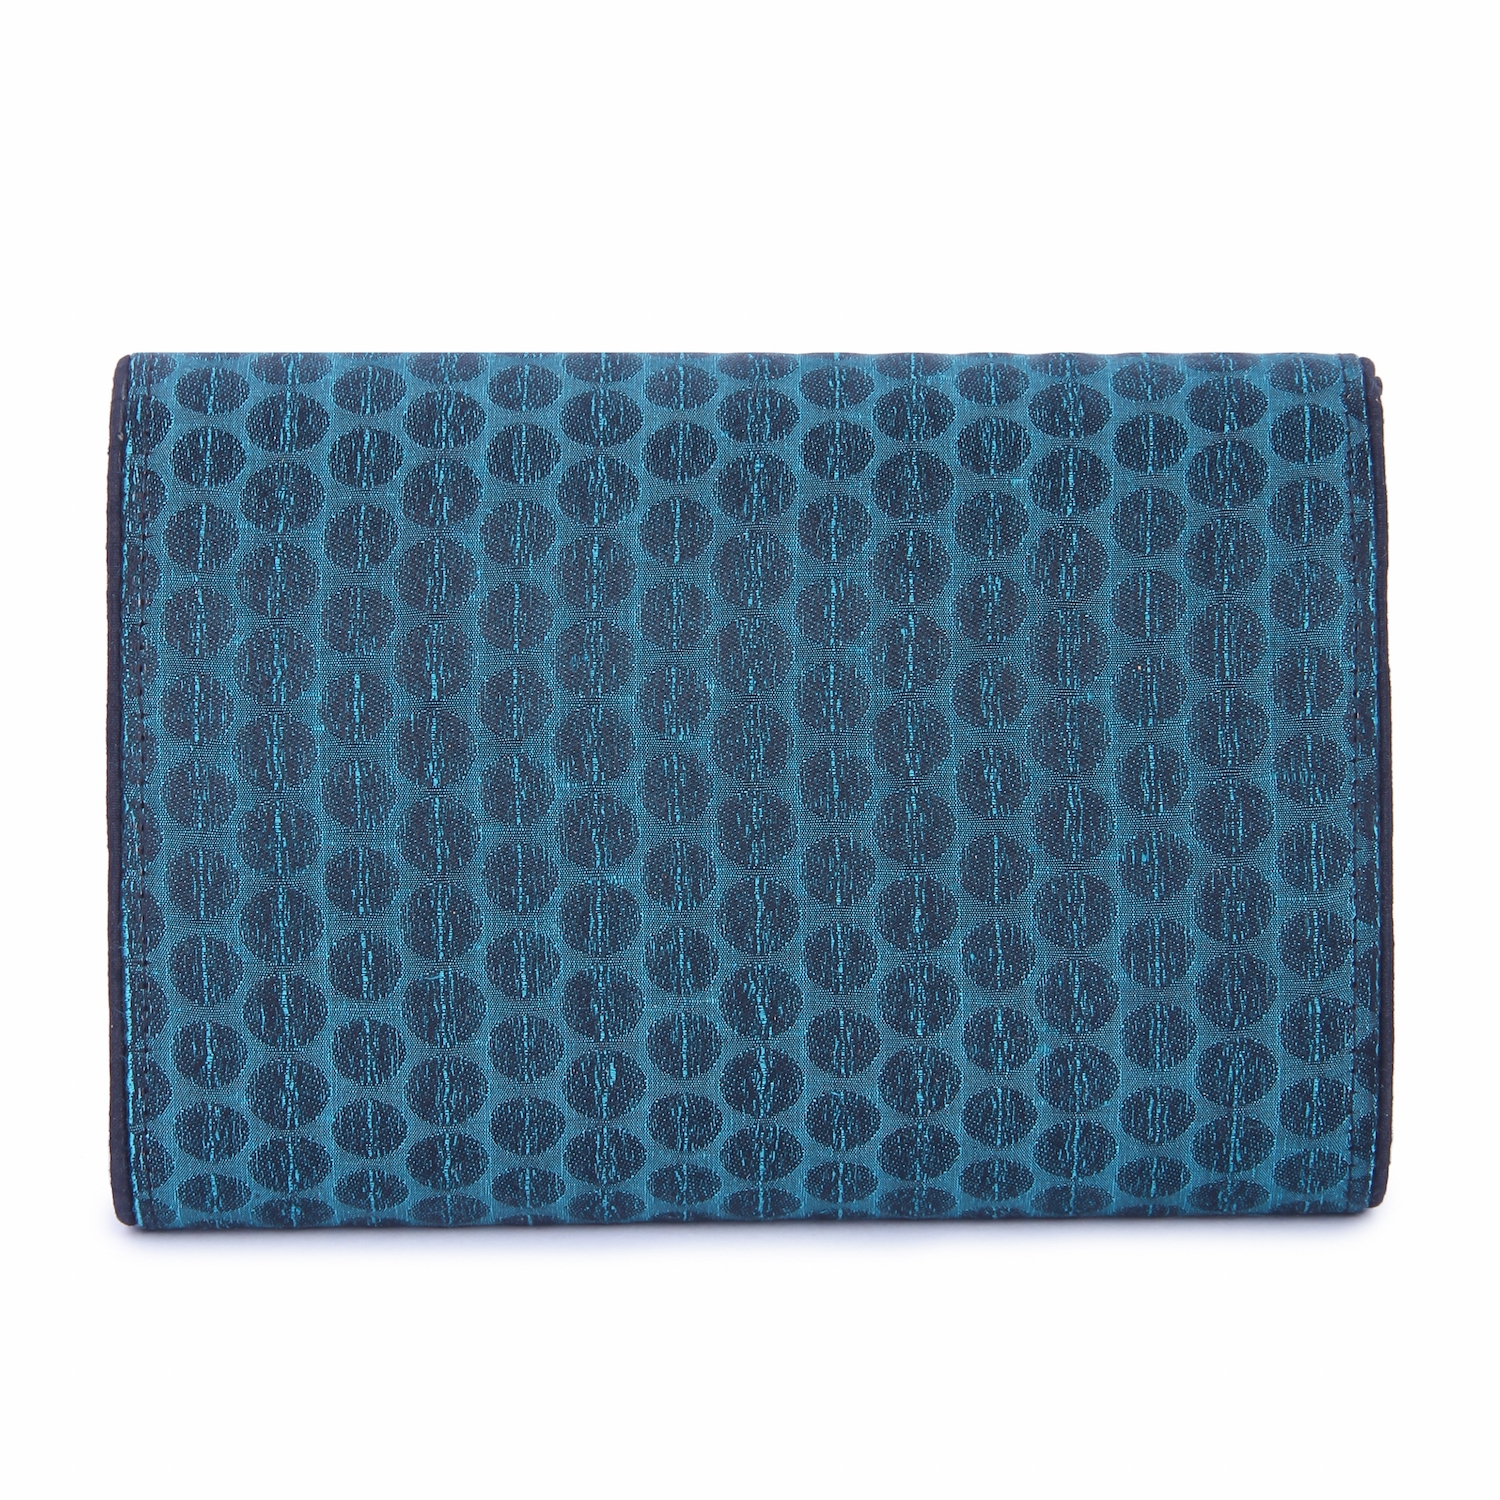 Dotted Teal clutch